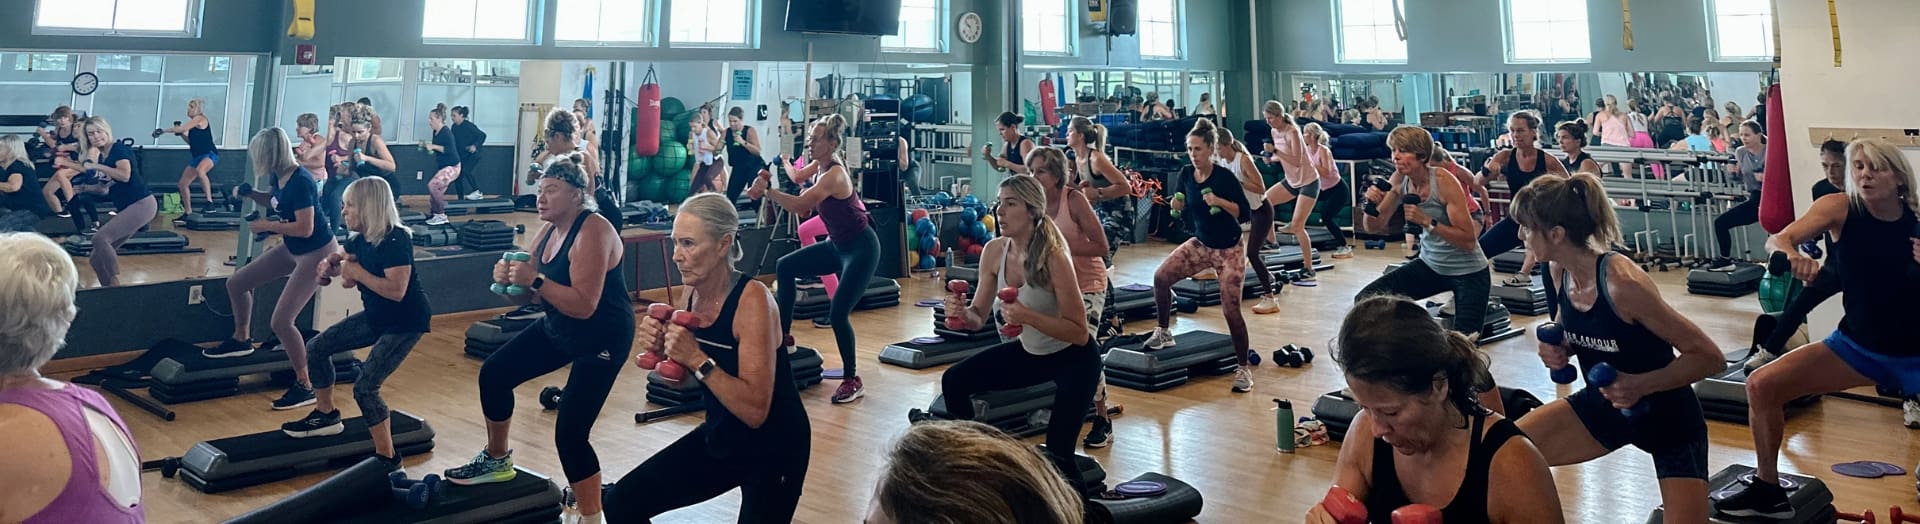 a hiit group exercise class at inlet fitness in virginia beach